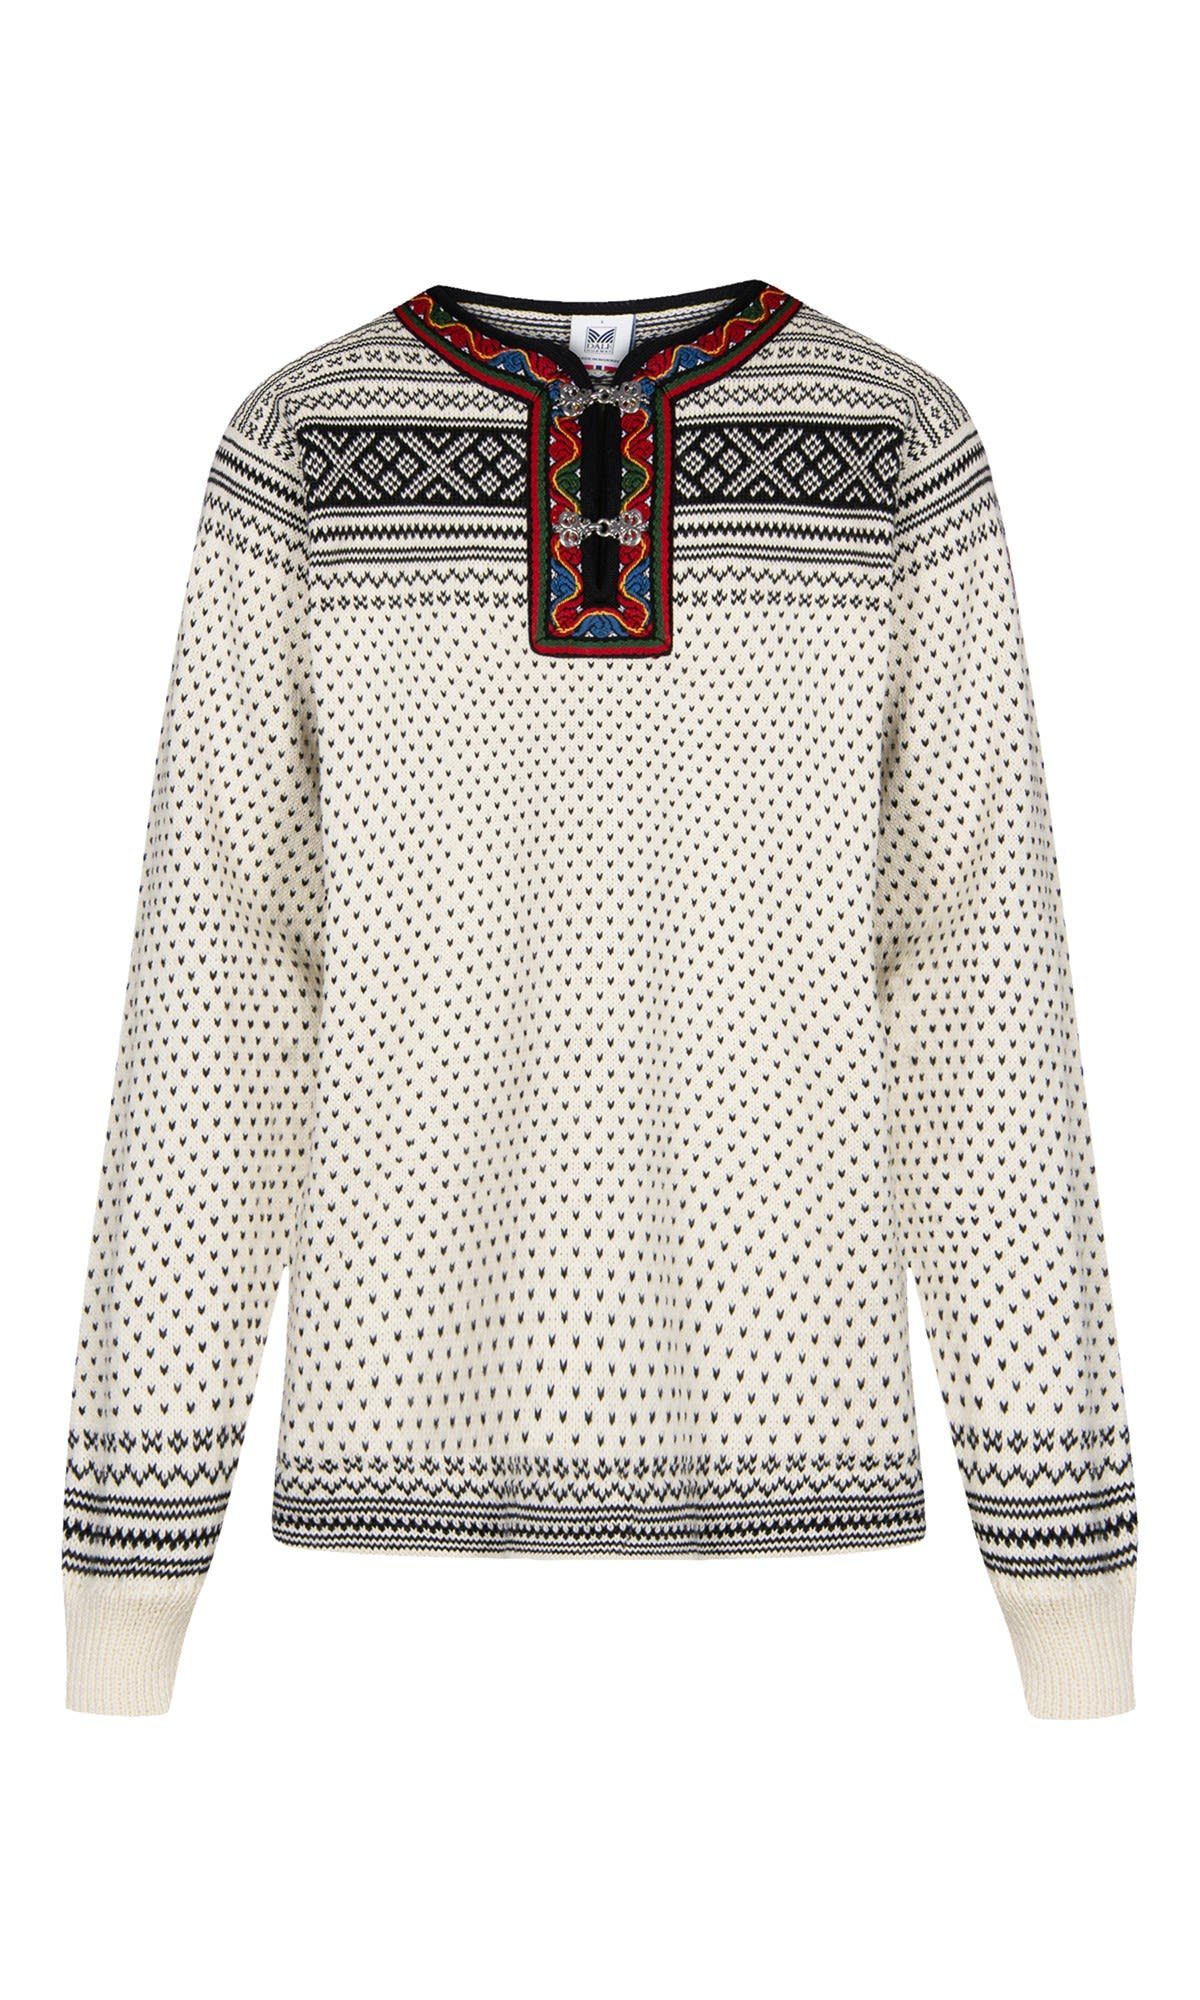 Dale Dale Norway - Longpullover Offwhite Setesdal Norway Sweater of Freizeitpullover Black Of